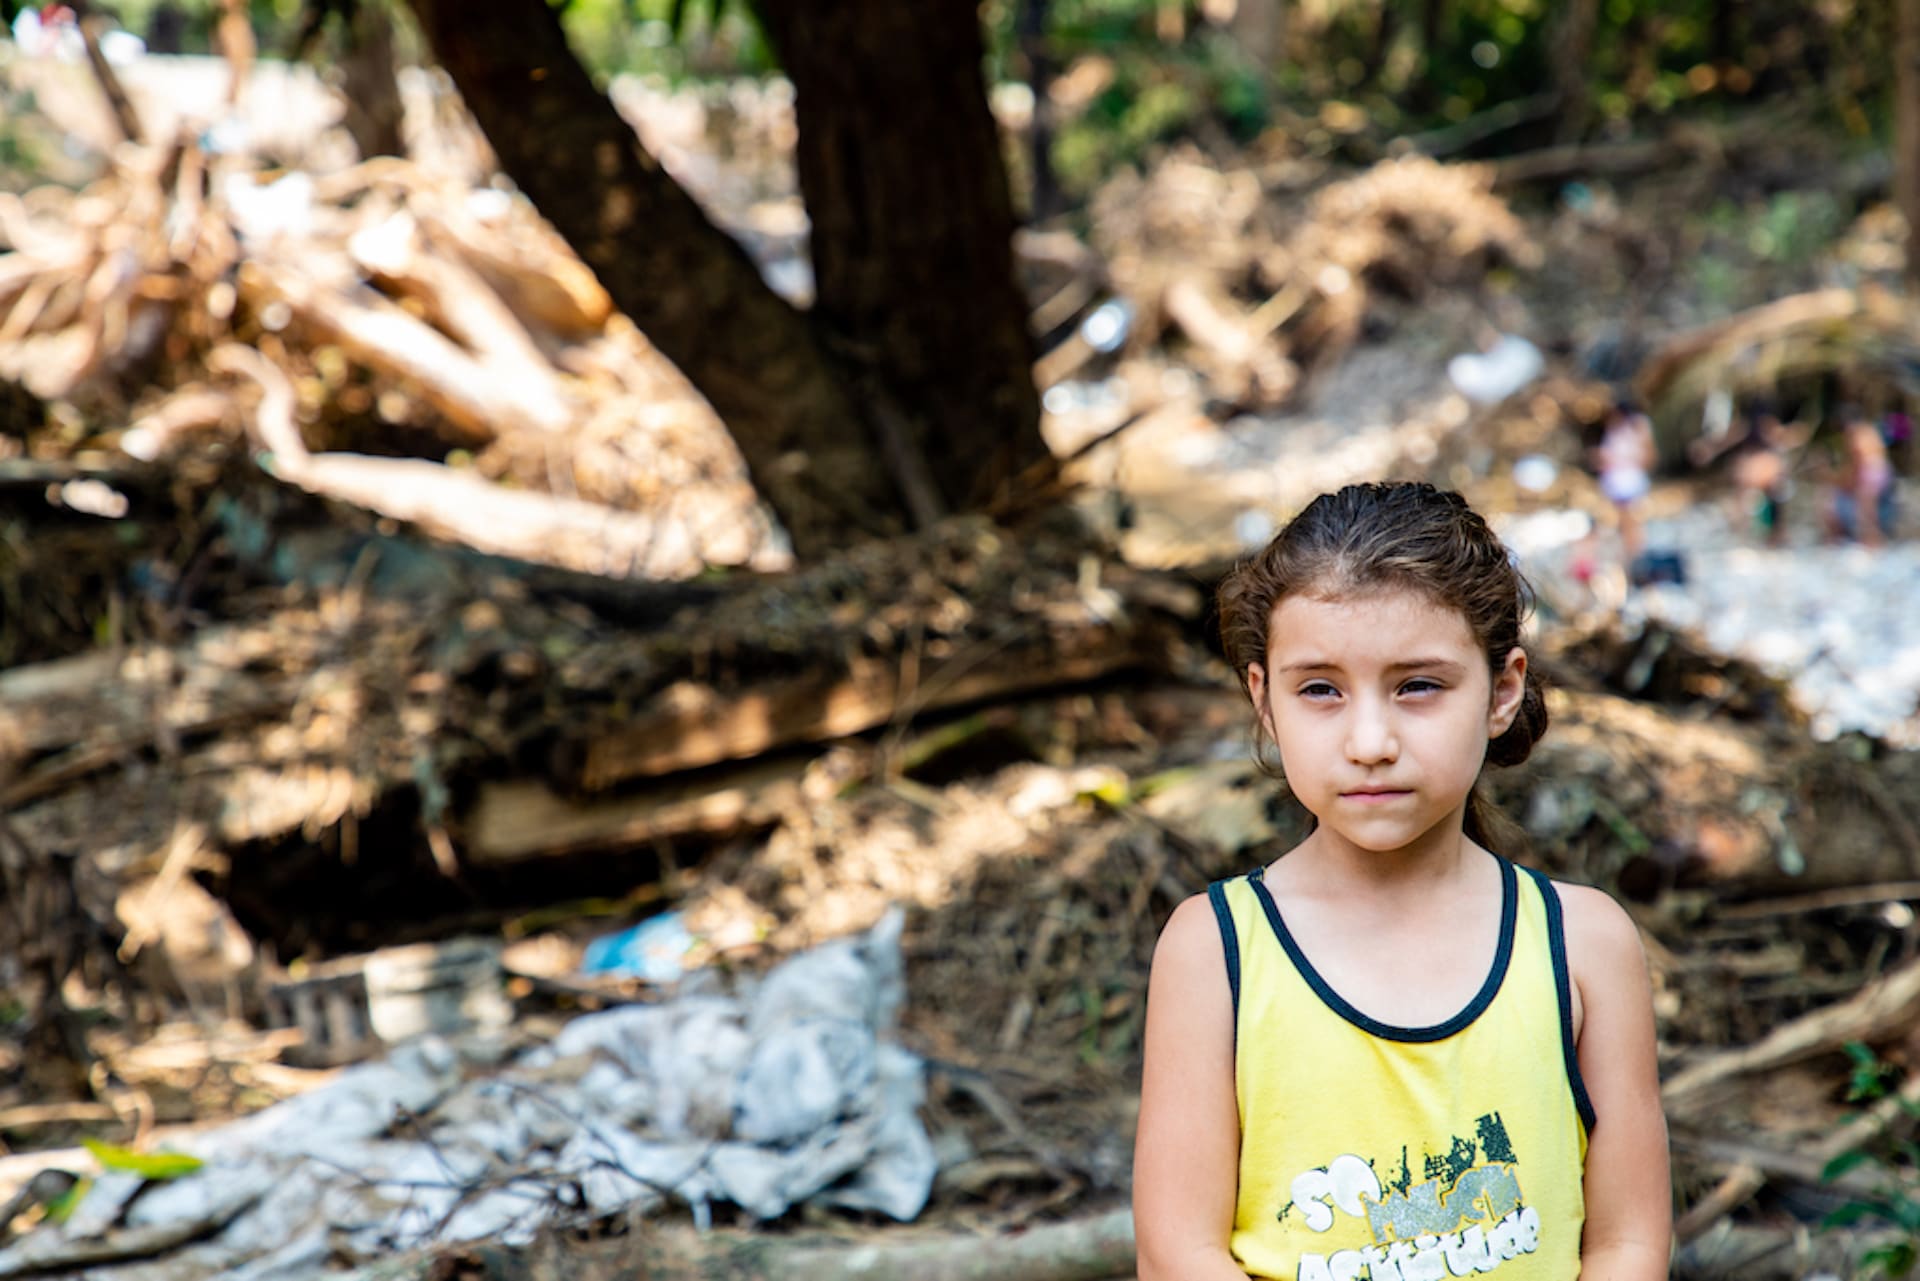 A young Honduran girl stands in the rubble of her home.